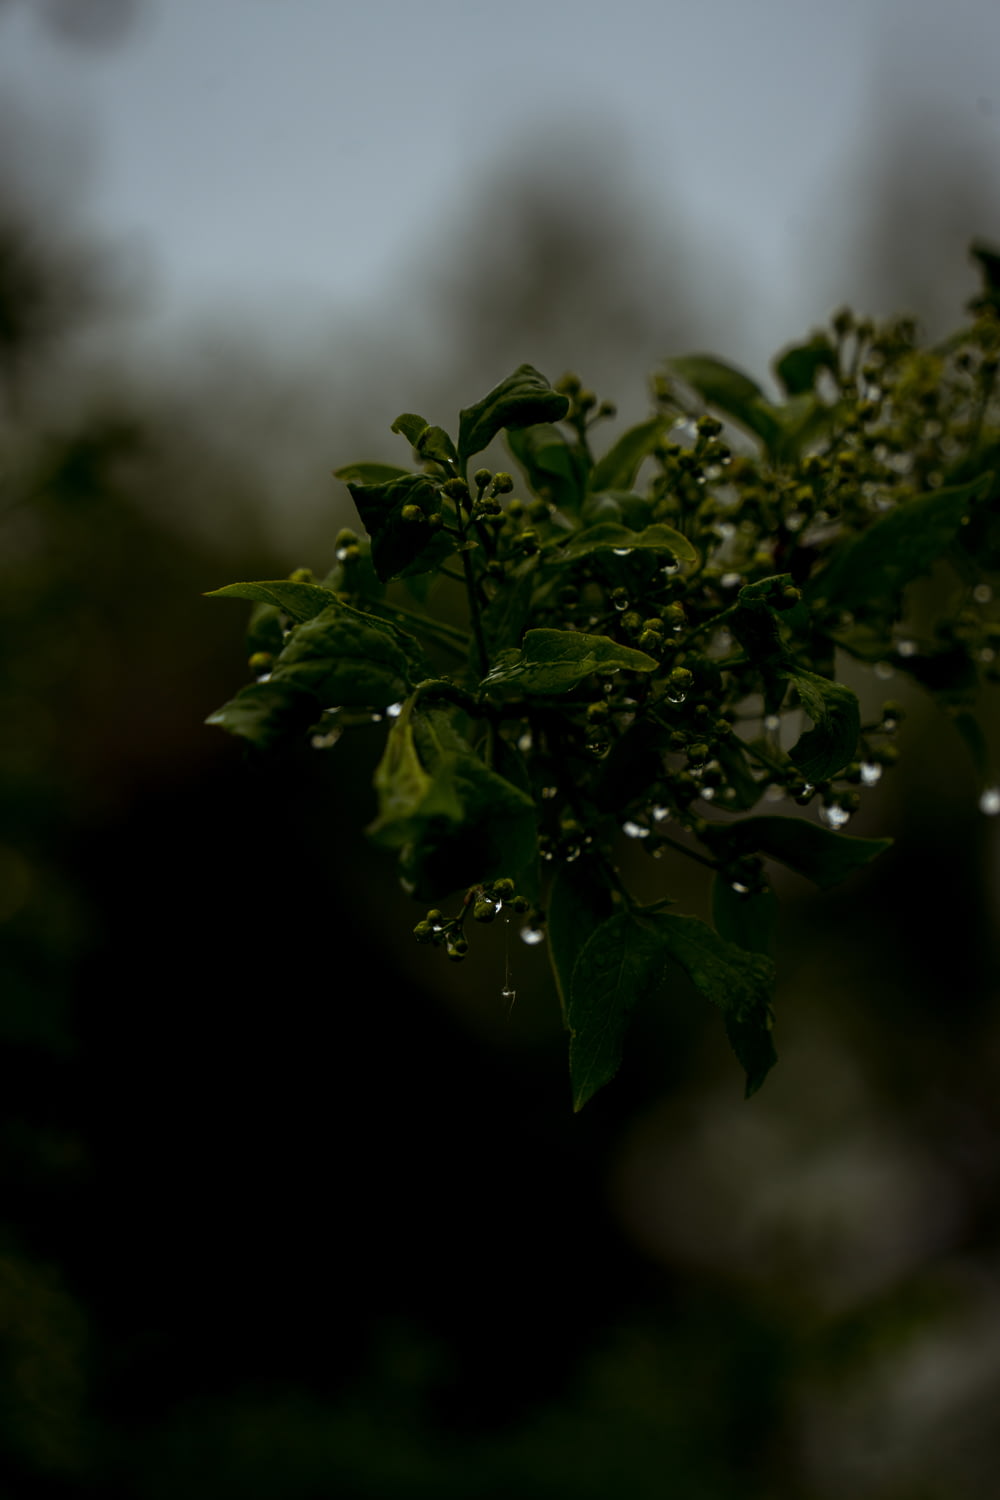 a close up of a tree branch with water droplets on it